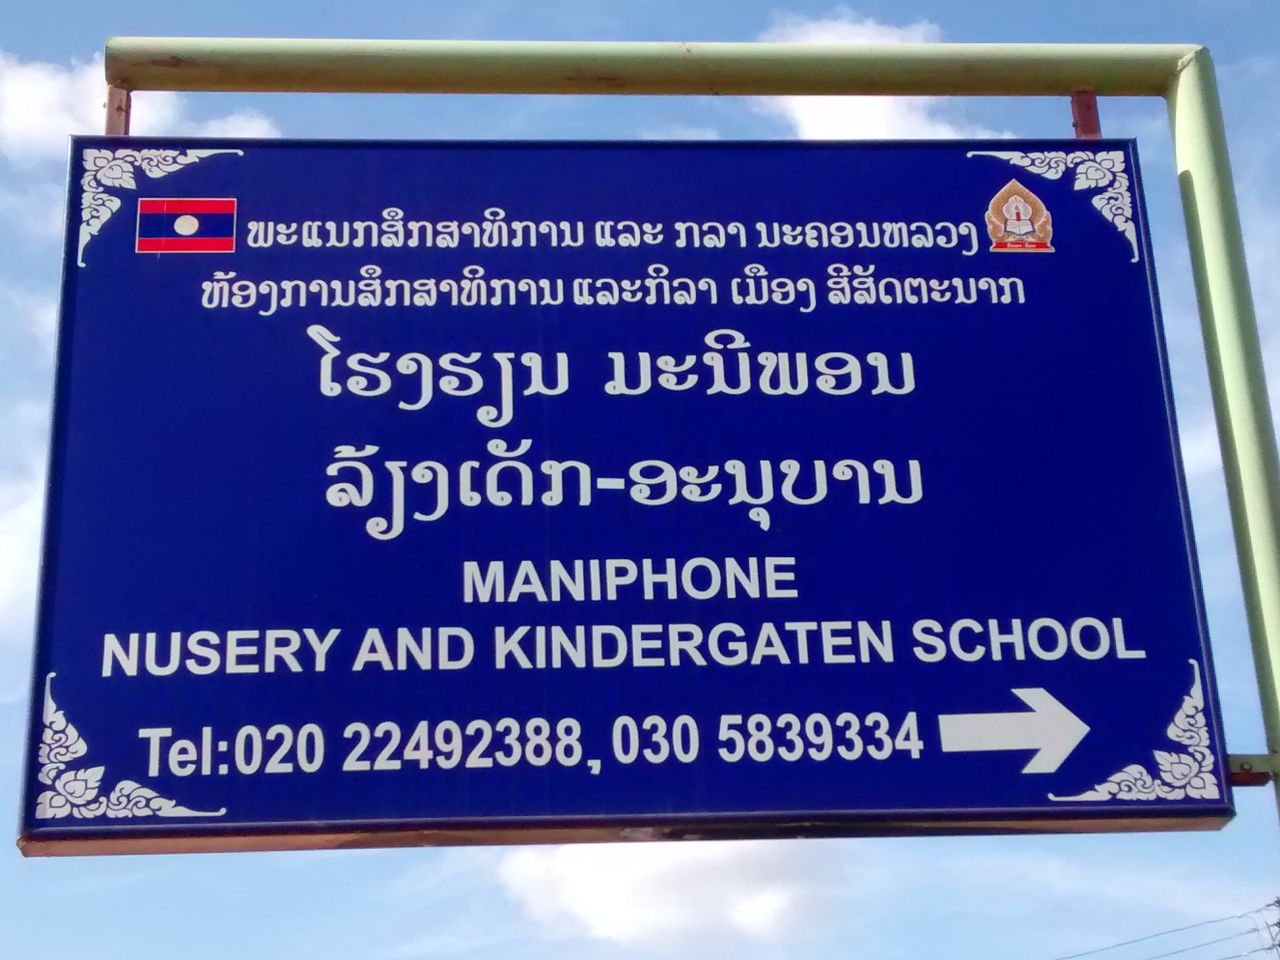 Maniphone Nusery and Kindergaten School